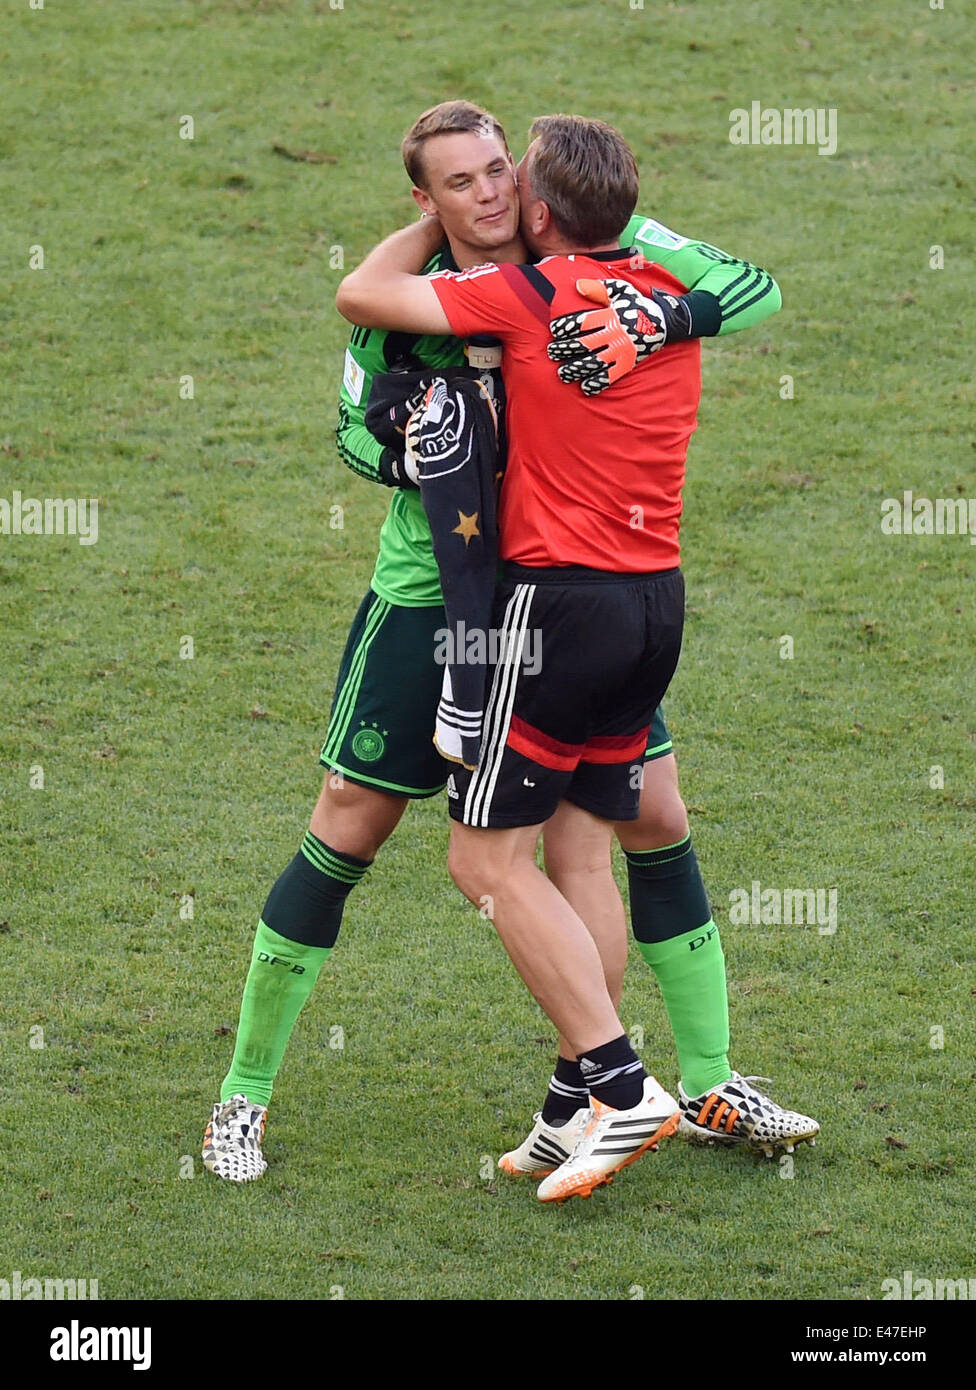 Rio de Janeiro, Brazil. 04th July, 2014. Goalkeeper coach Andreas Koepke (R) of Germany hugs goalkeeper Manuel Neuer after the FIFA World Cup 2014 quarter final soccer match between France and Germany at Estadio do Maracana in Rio de Janeiro, Brazil, 04 July 2014. Photo: Marcus Brandt/dpa/Alamy Live News Stock Photo